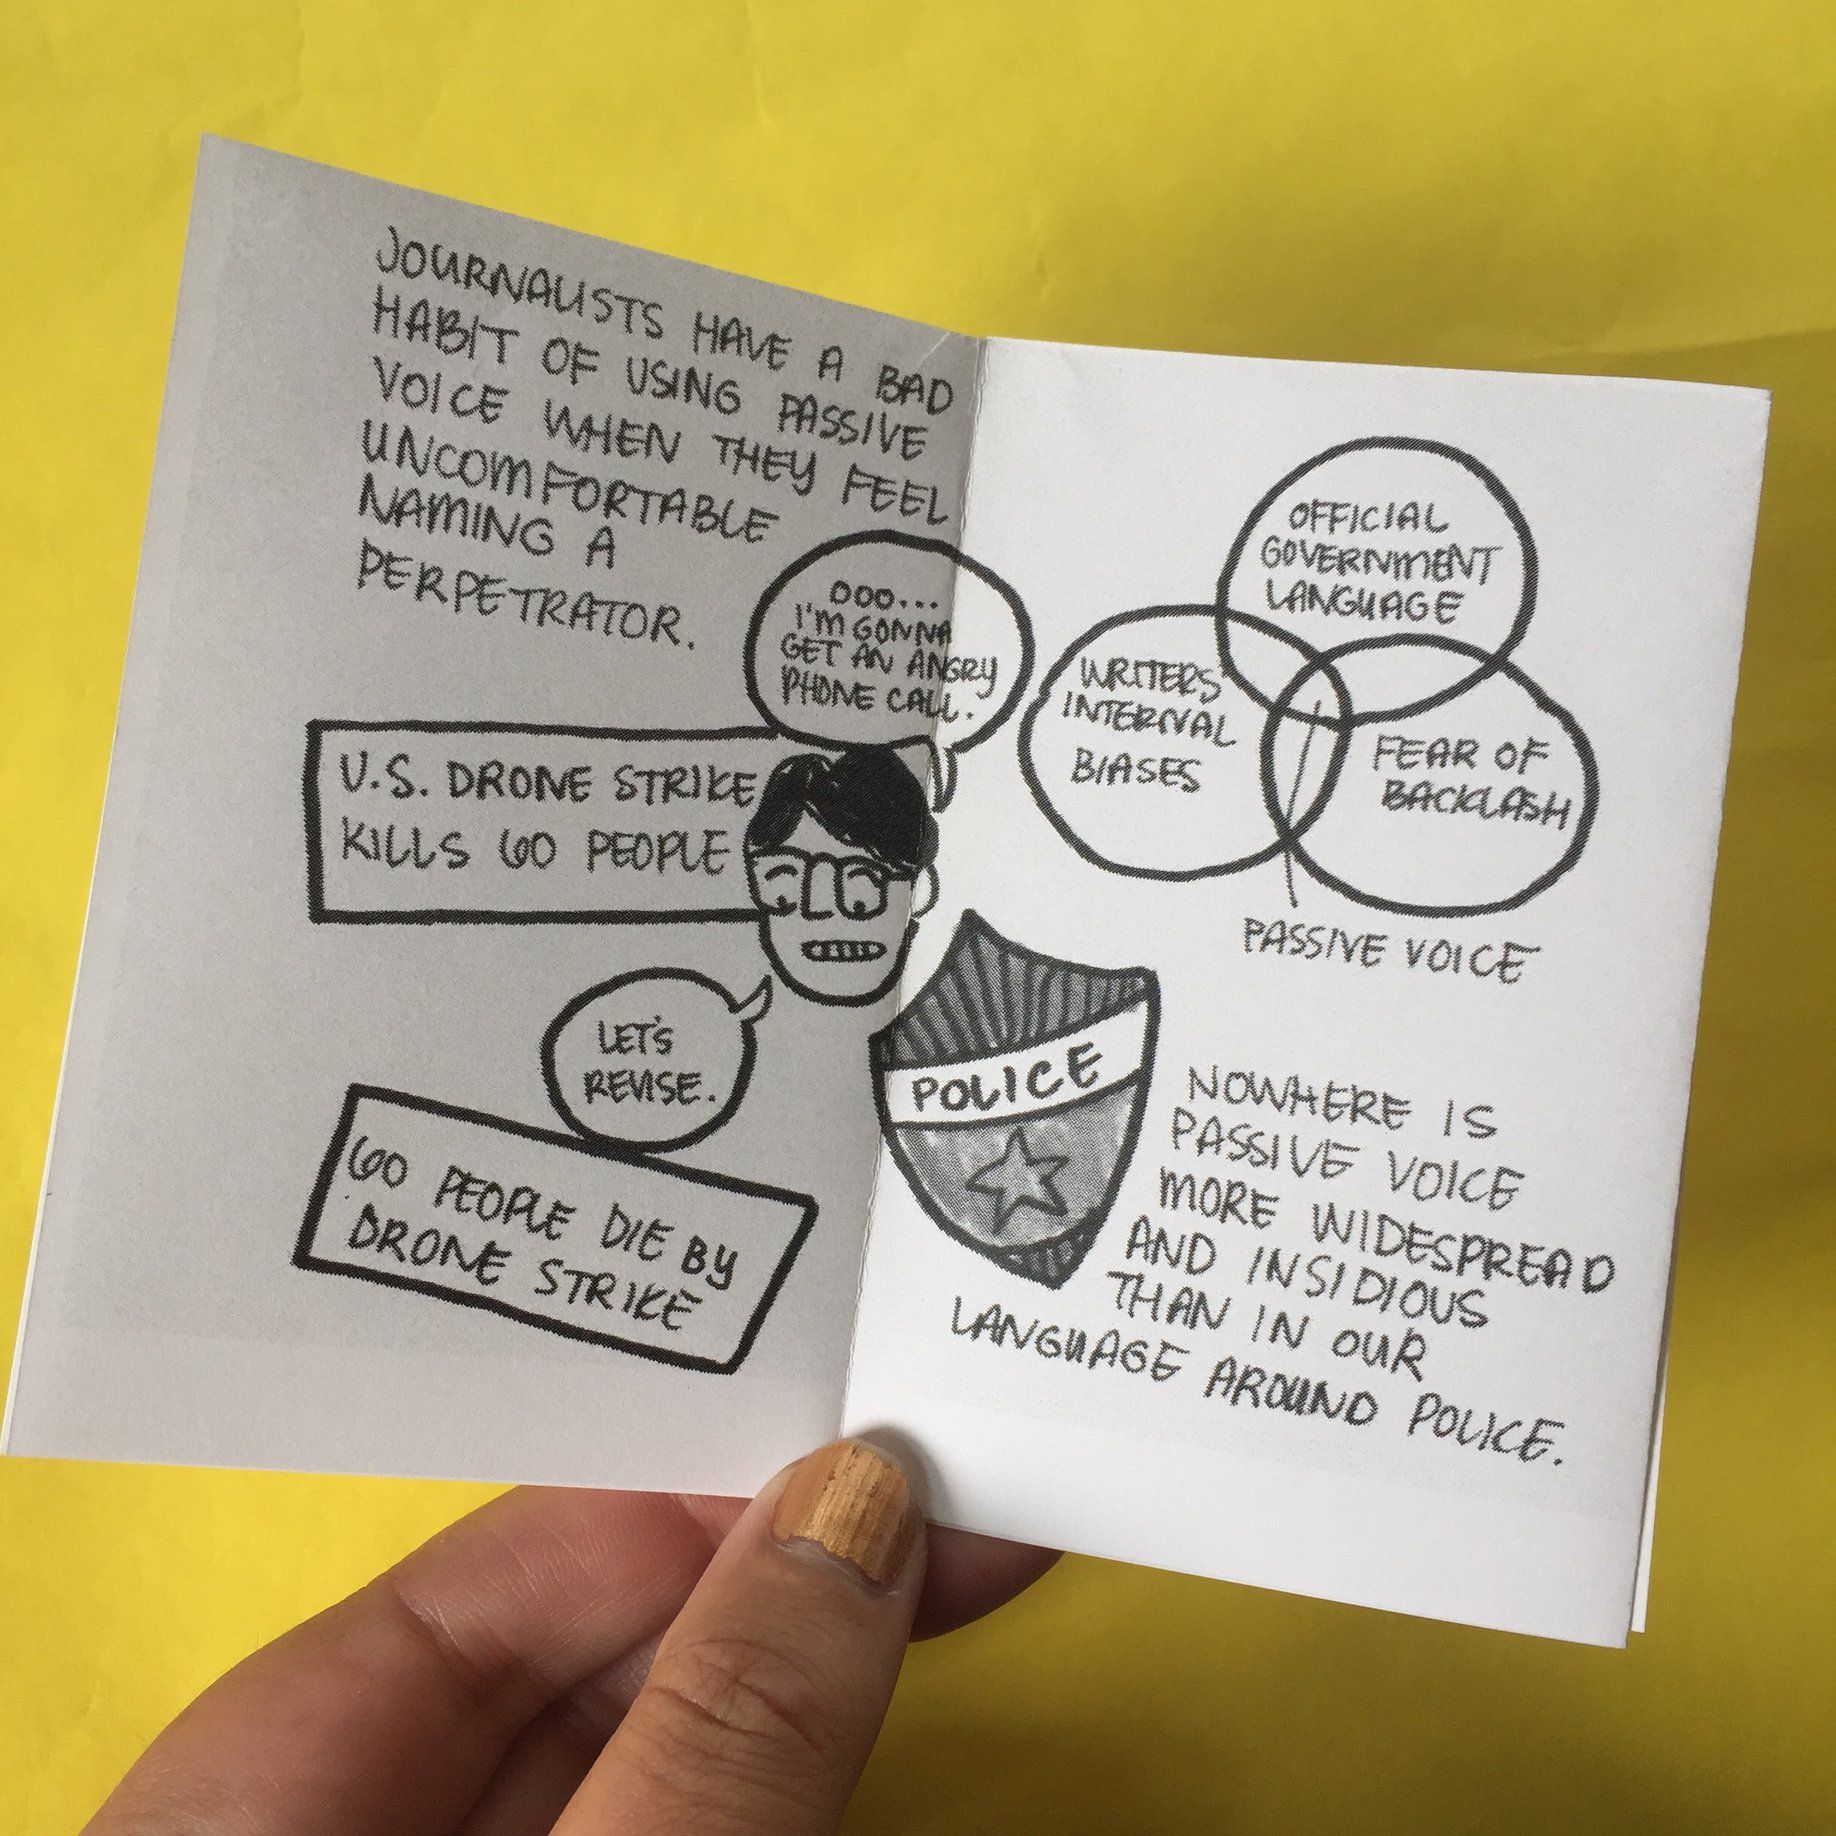 Interior of a small booklet demonstrating how passive voice shapes how we talk and think about current events.